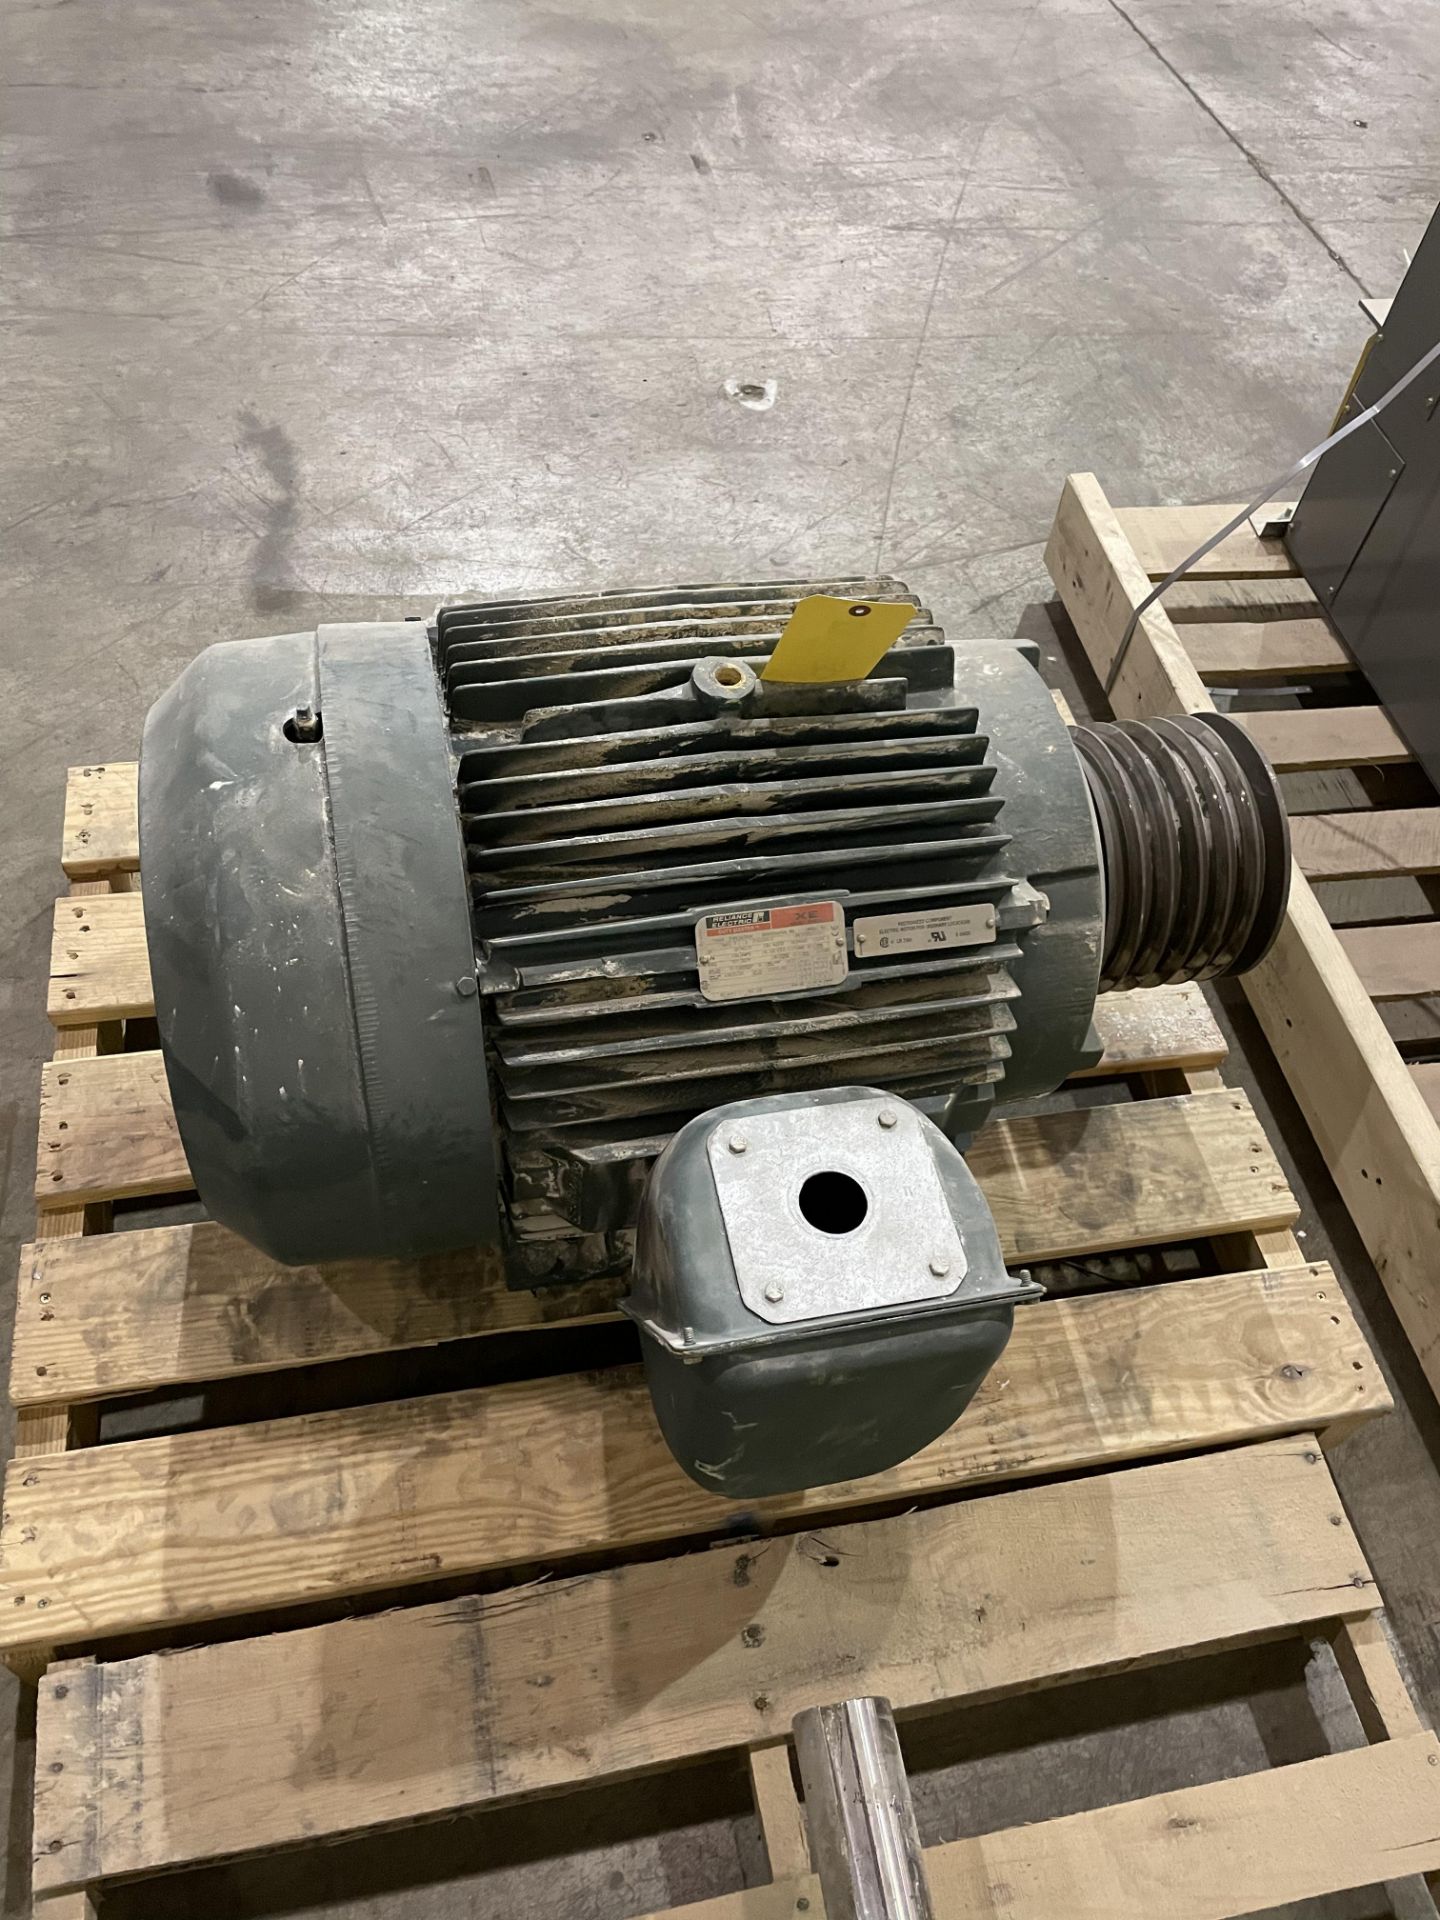 Reliance Electric 60 HP Motor Loading/Rigging Fee $35 - Image 2 of 3